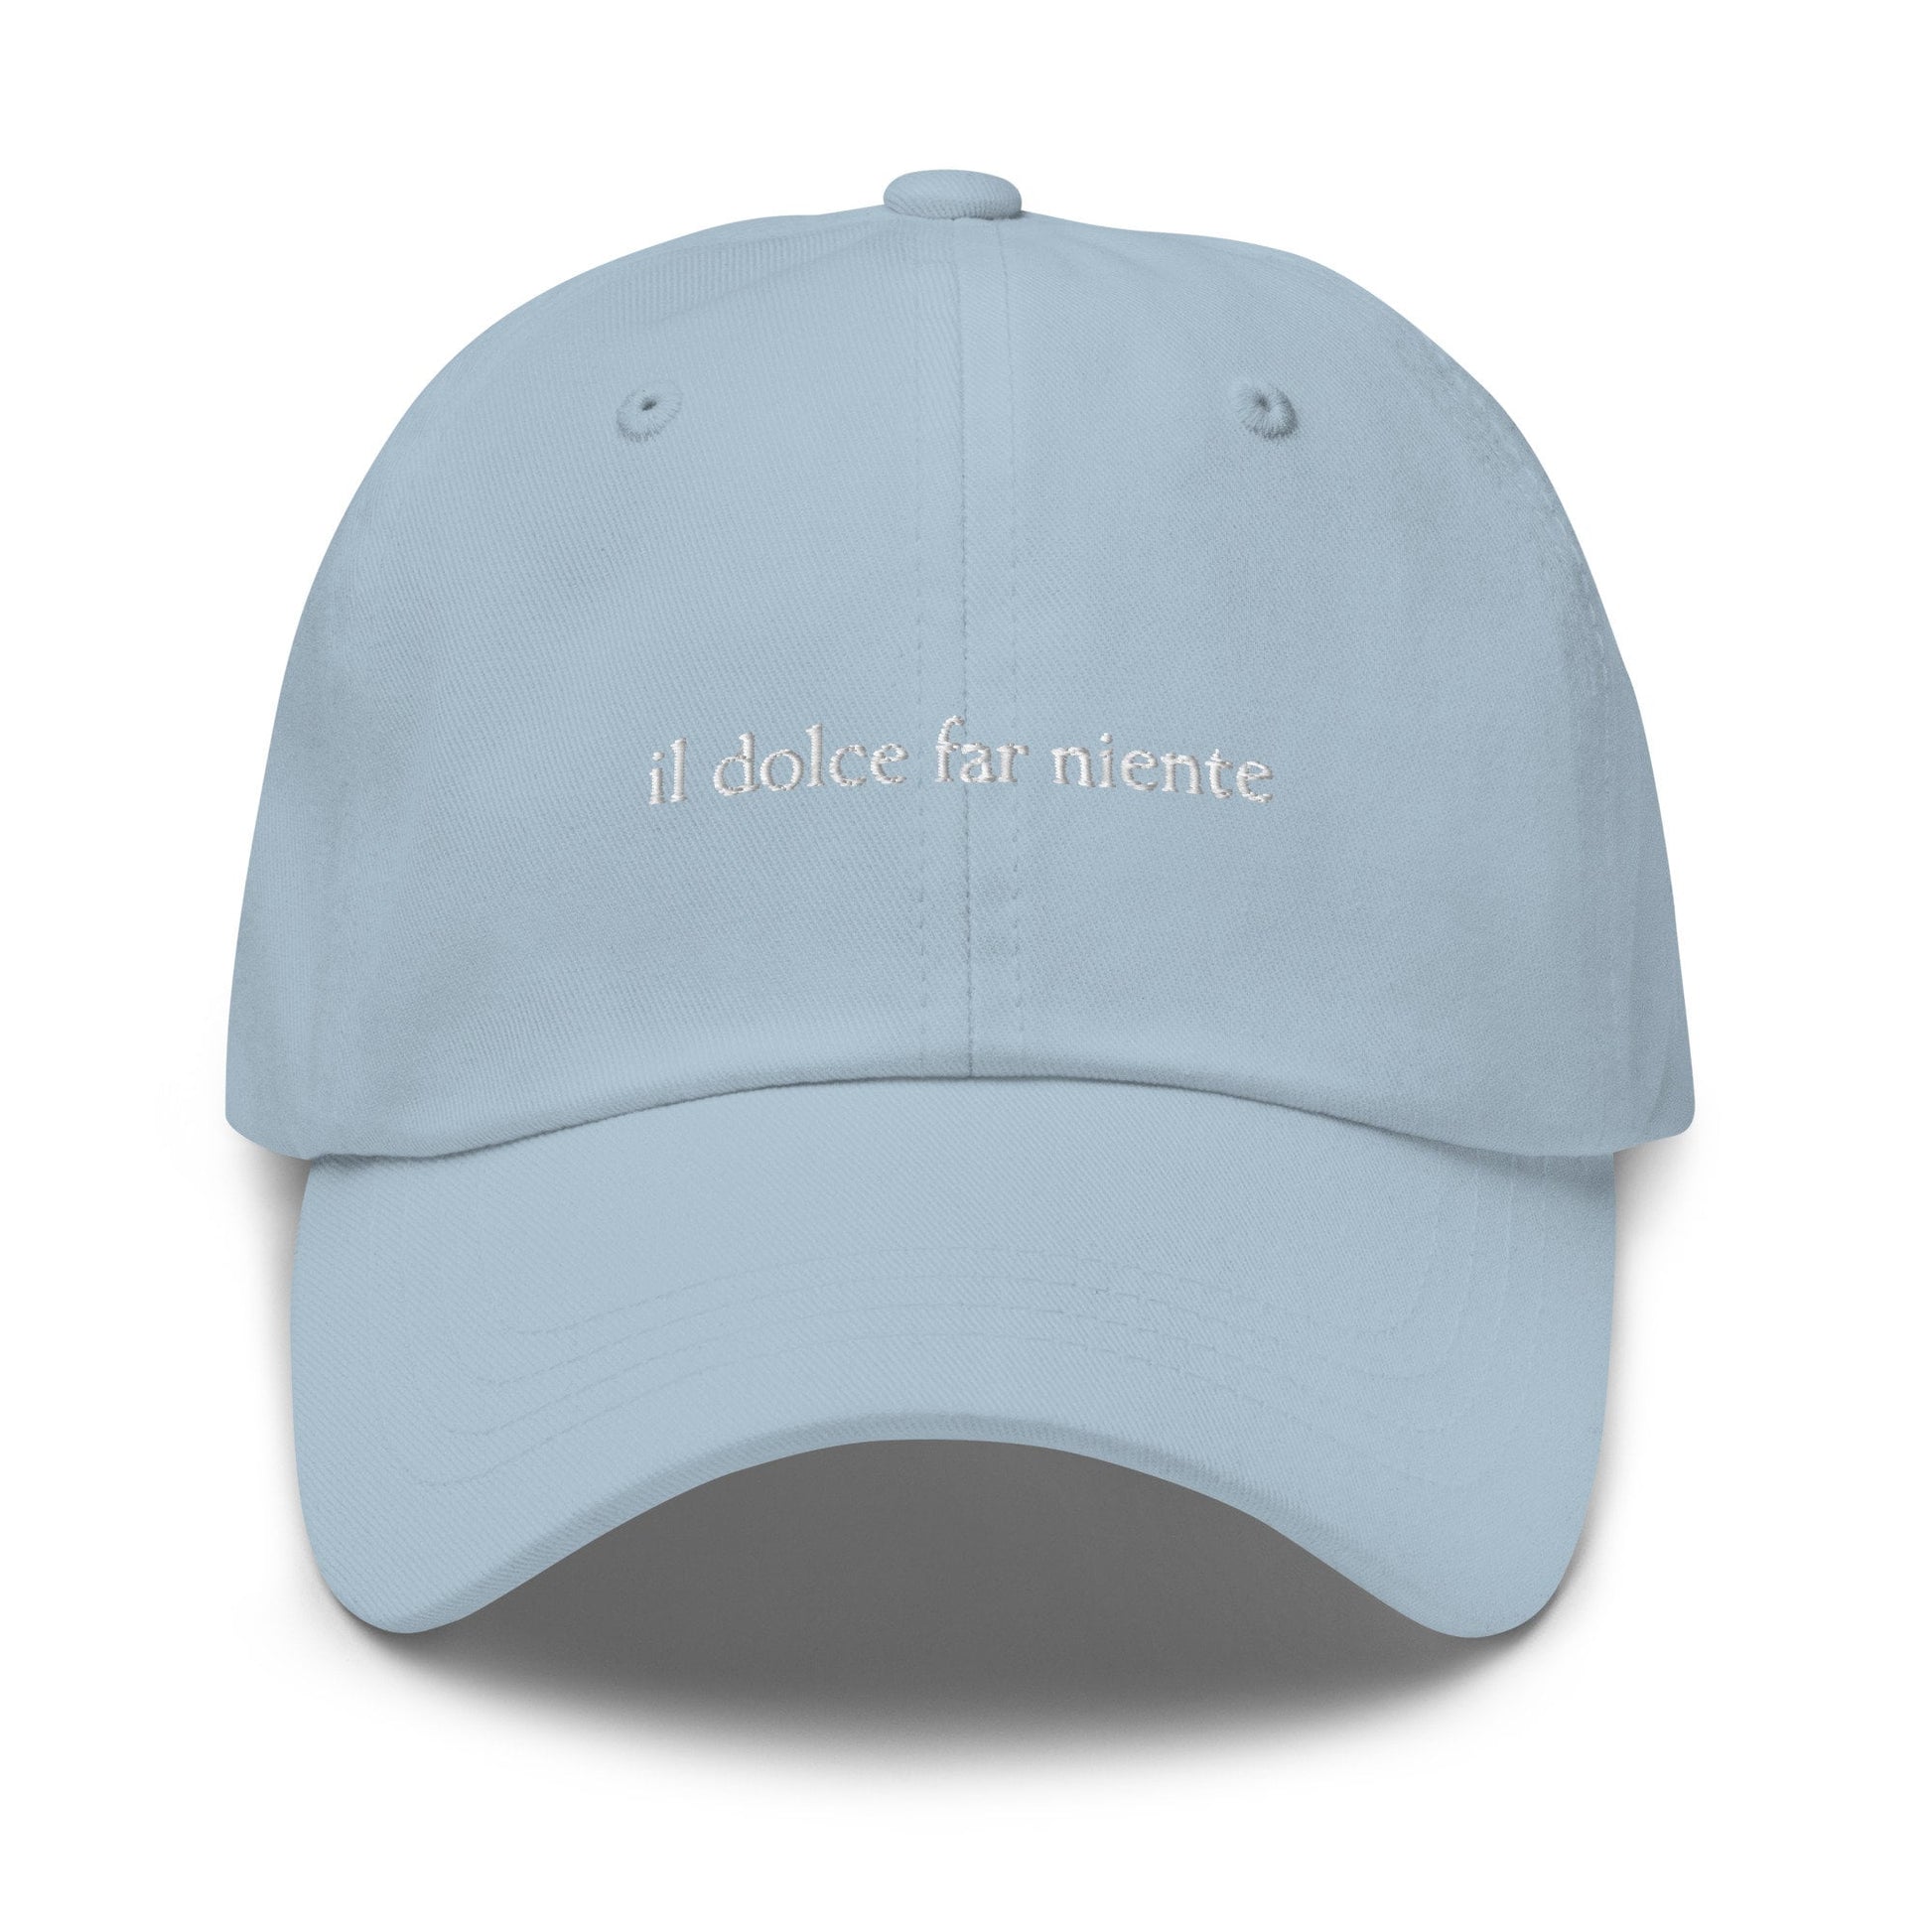 Il Dolce Far Niente Dad Hat - The Italian Art of Doing Nothing - Cotton Embroidered Cap - Multiple Colors